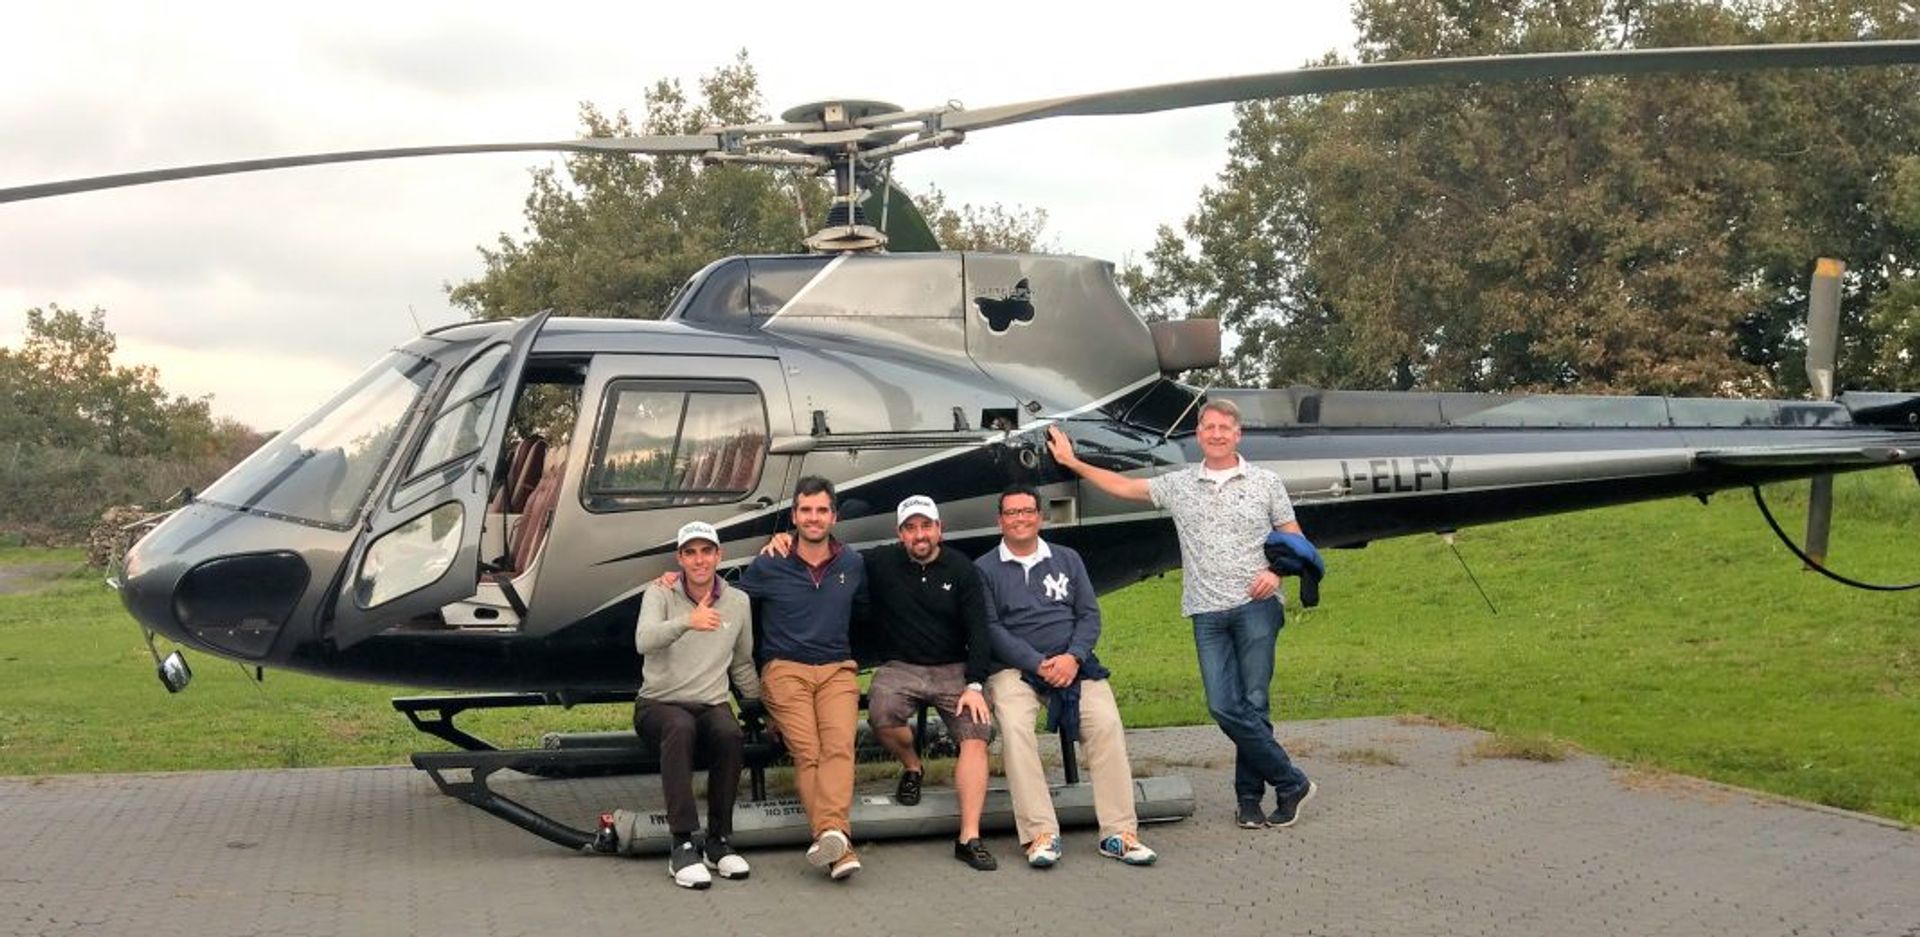 Checking out Mount Etna by helicopter after your round (photo credits, Leadingcourses)